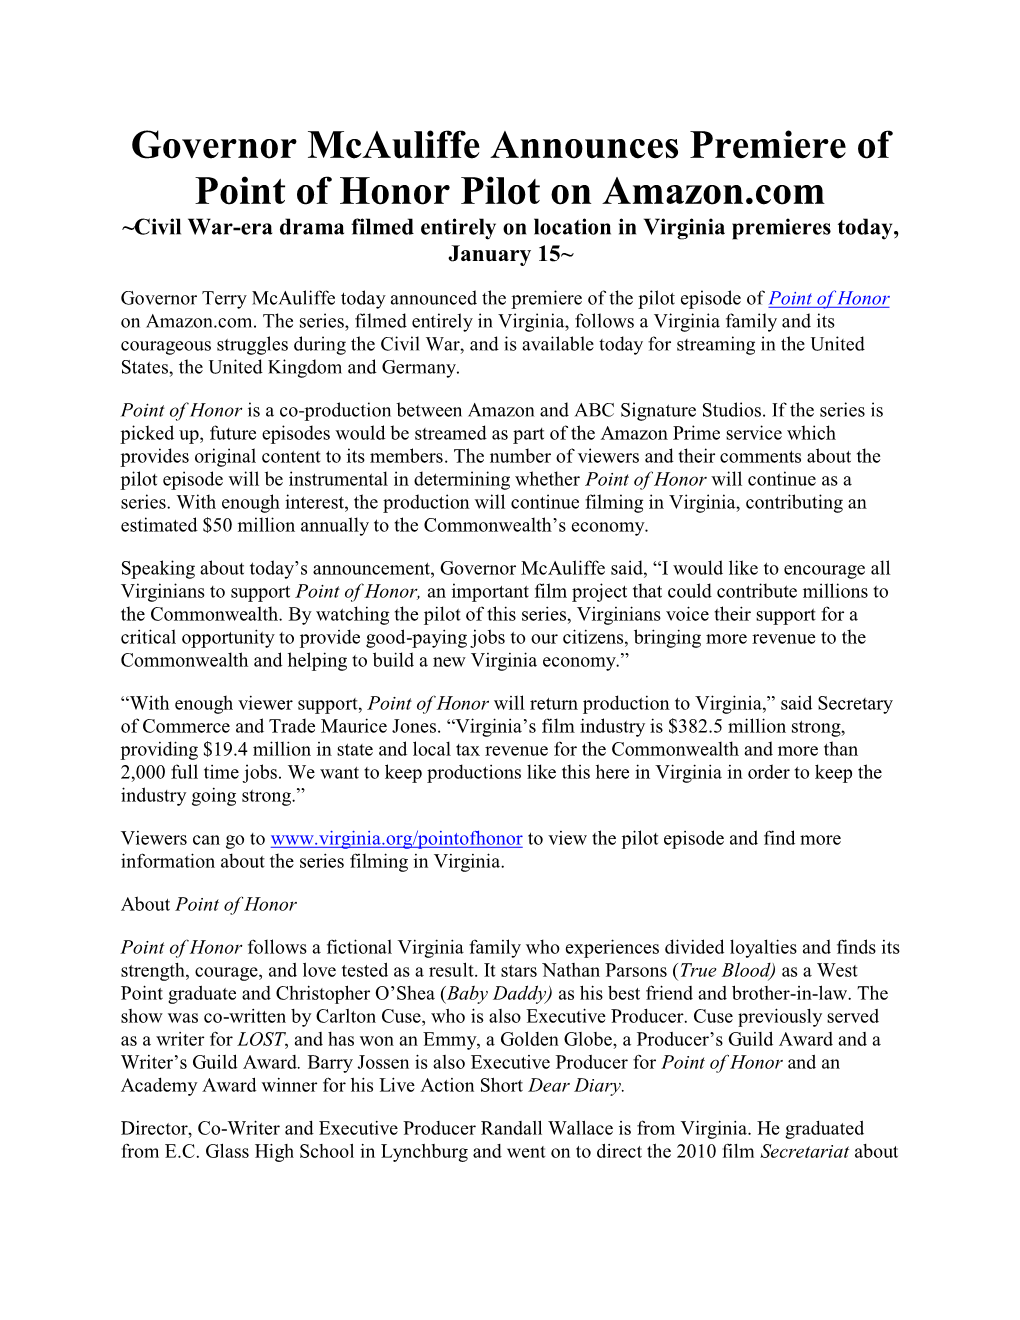 Governor Mcauliffe Announces Premiere of Point of Honor Pilot on Amazon.Com ~Civil War-Era Drama Filmed Entirely on Location in Virginia Premieres Today, January 15~